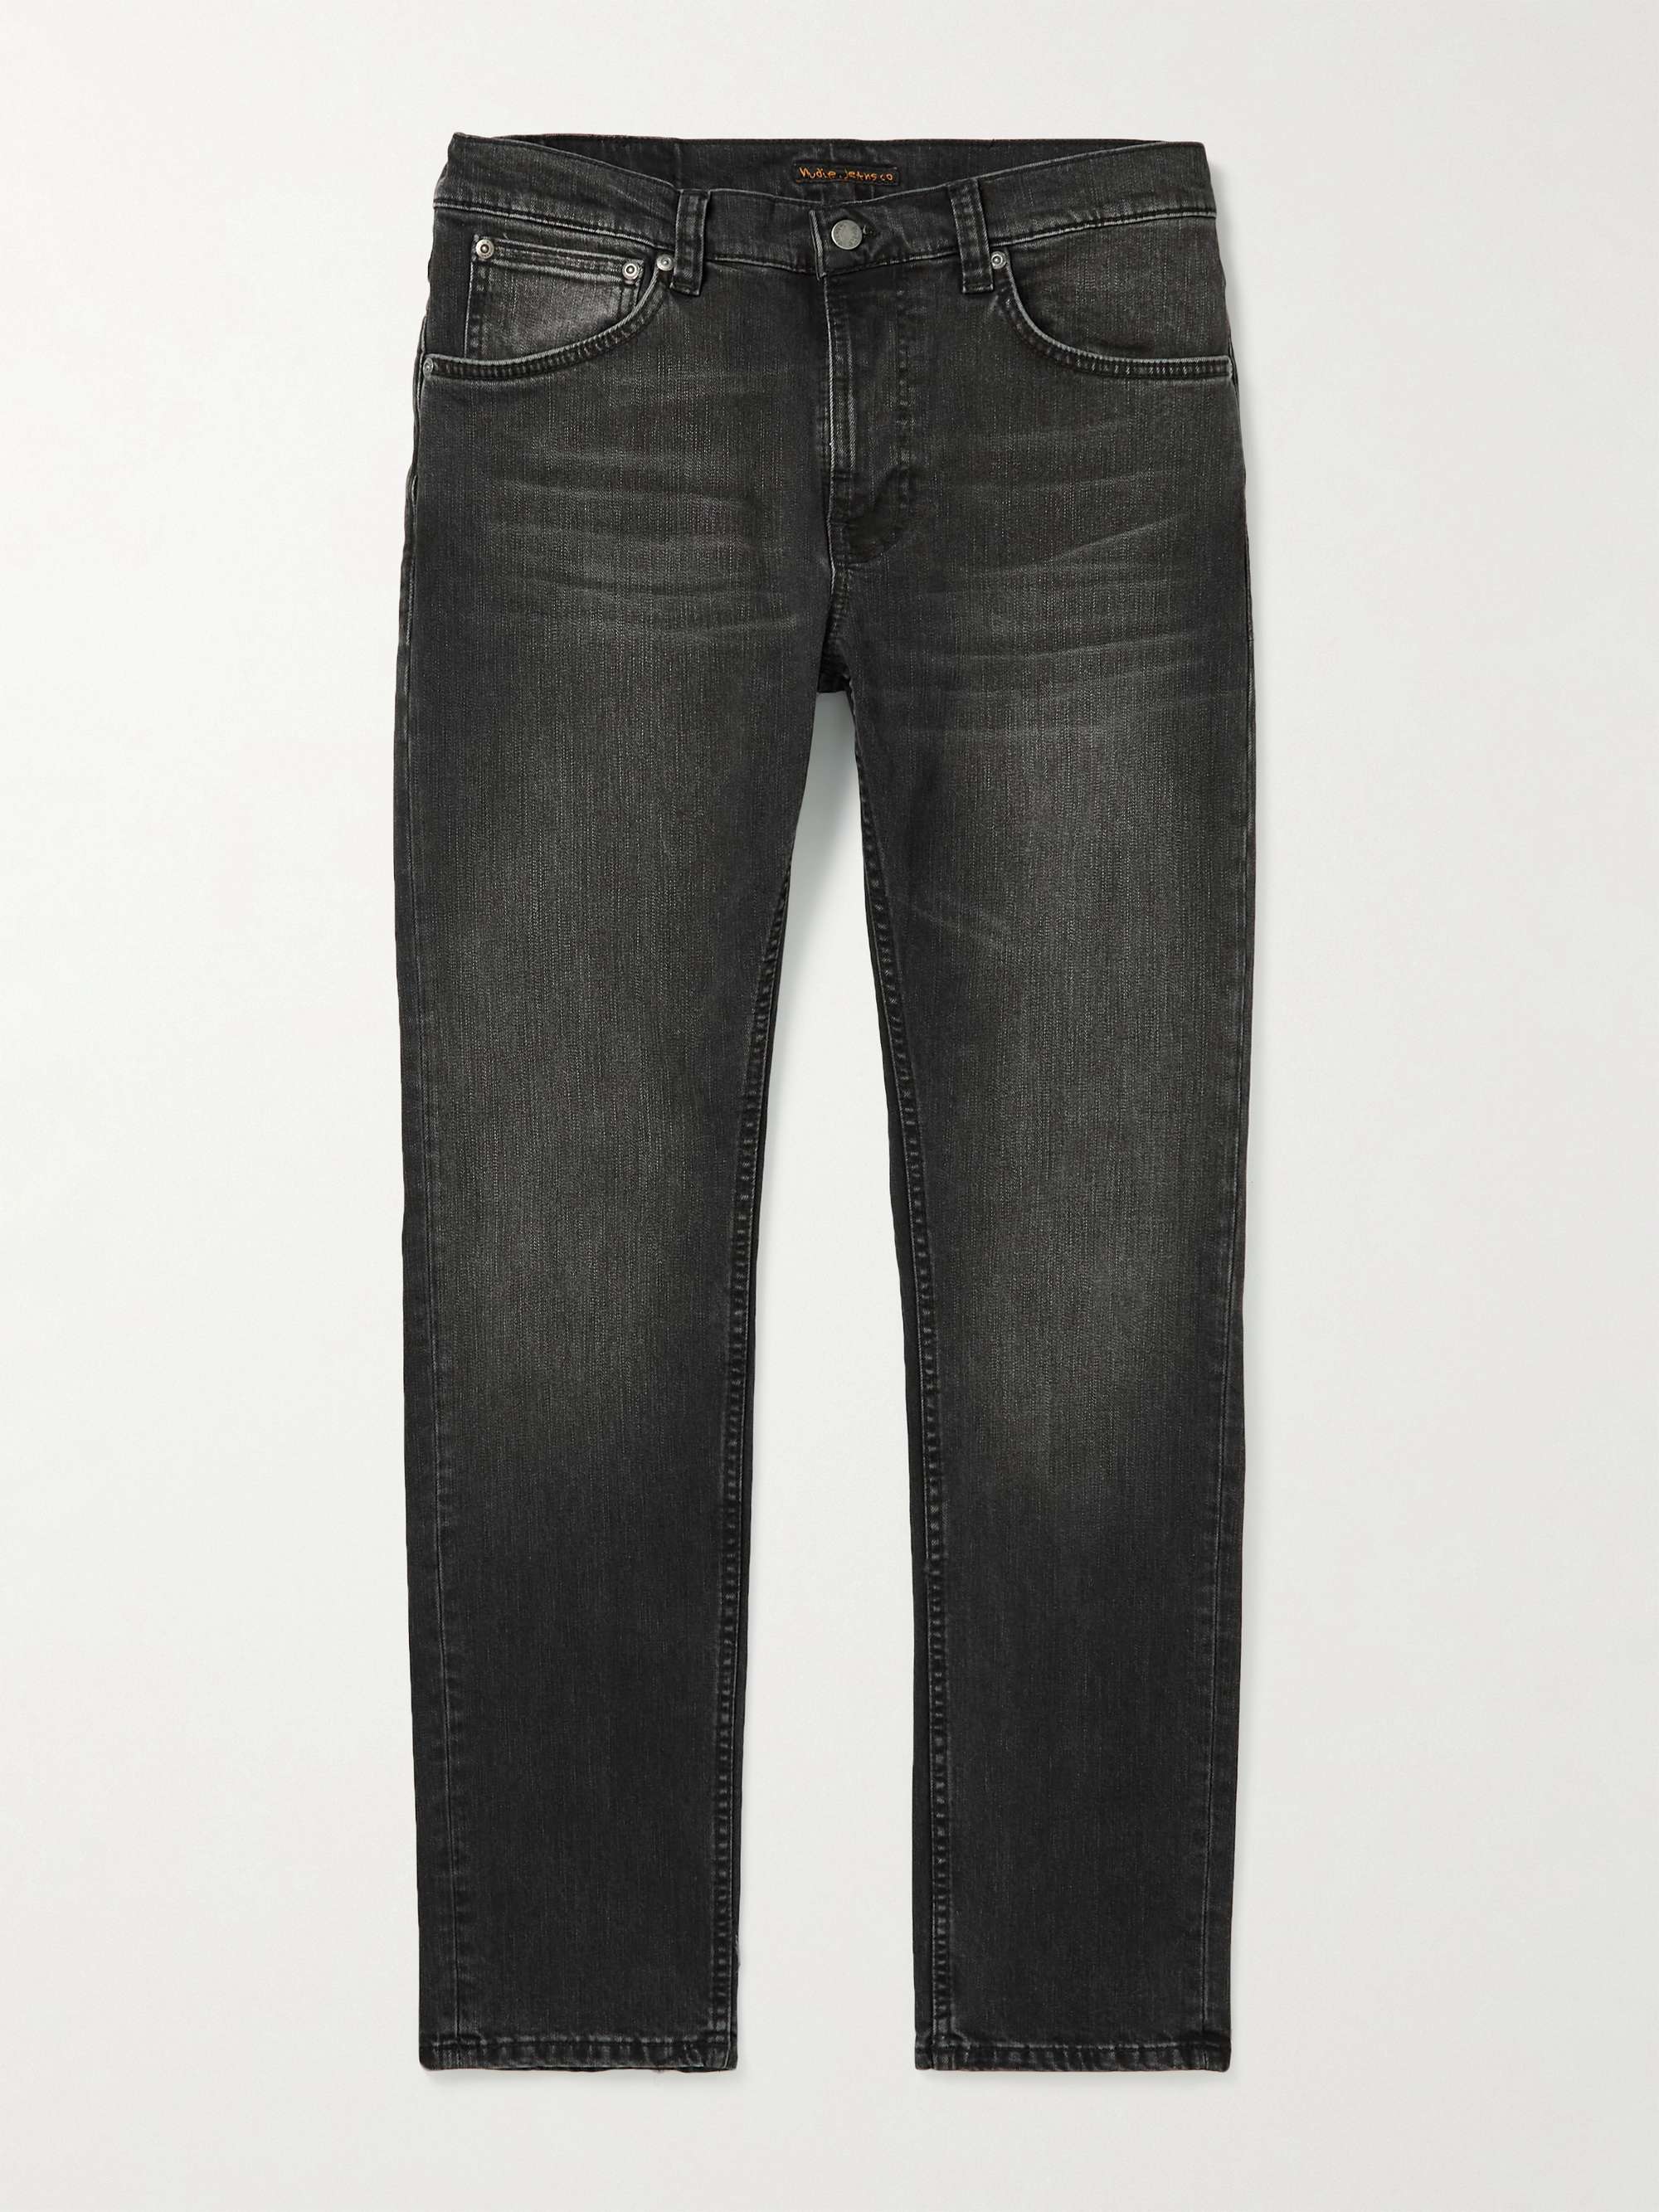 NUDIE JEANS Slim-Fit Stretch-Cotton Jeans